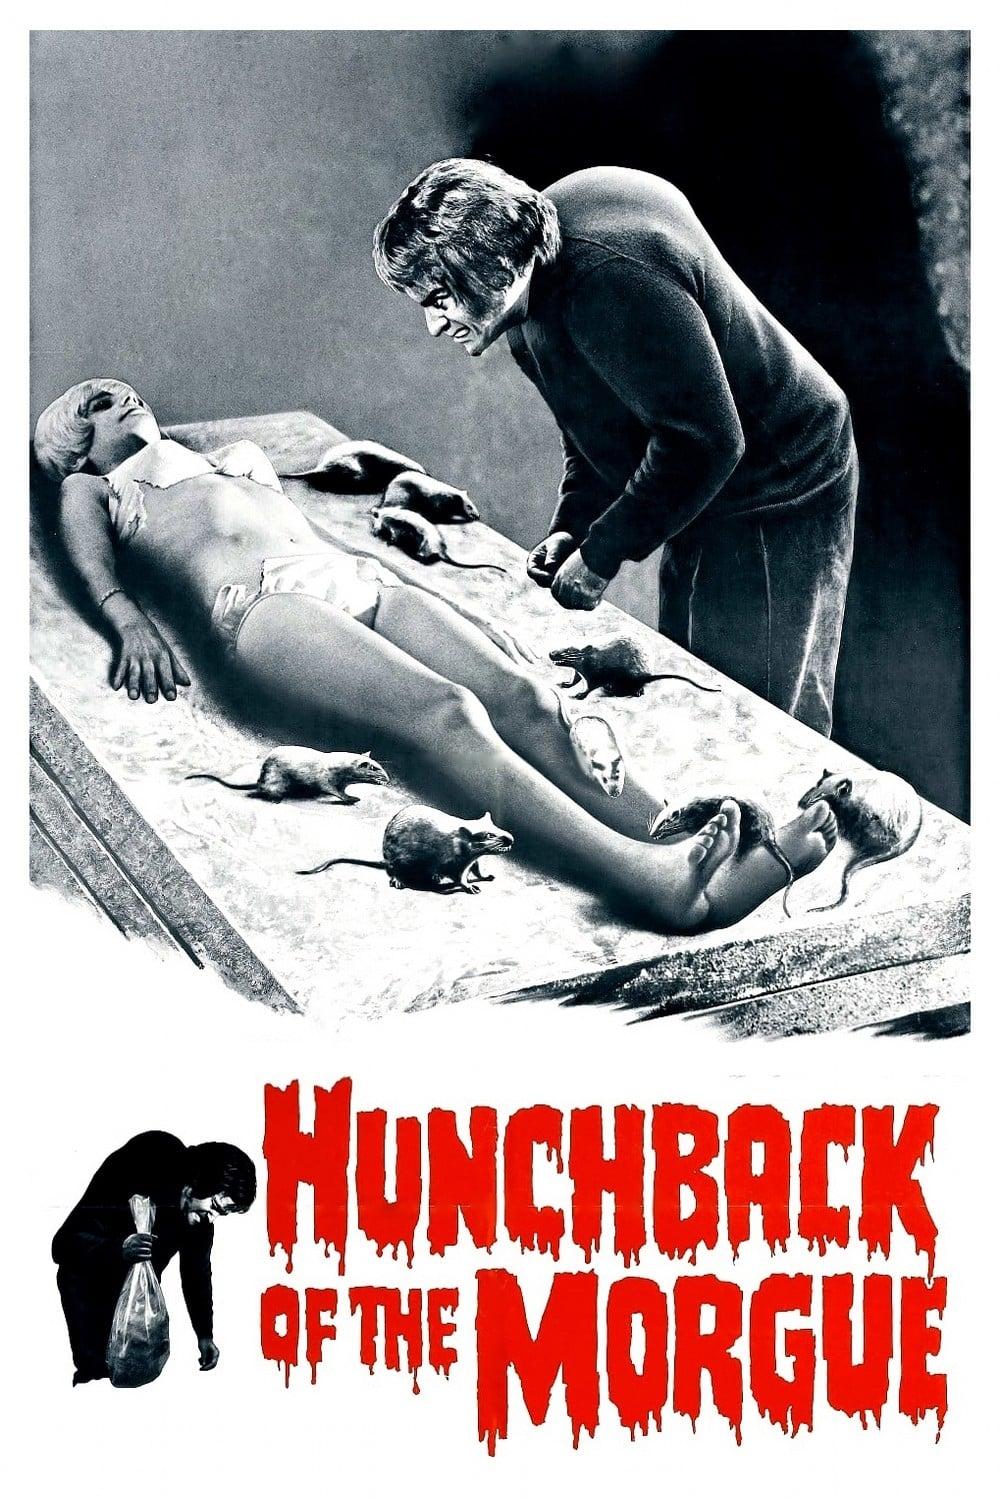 Hunchback of the Morgue poster